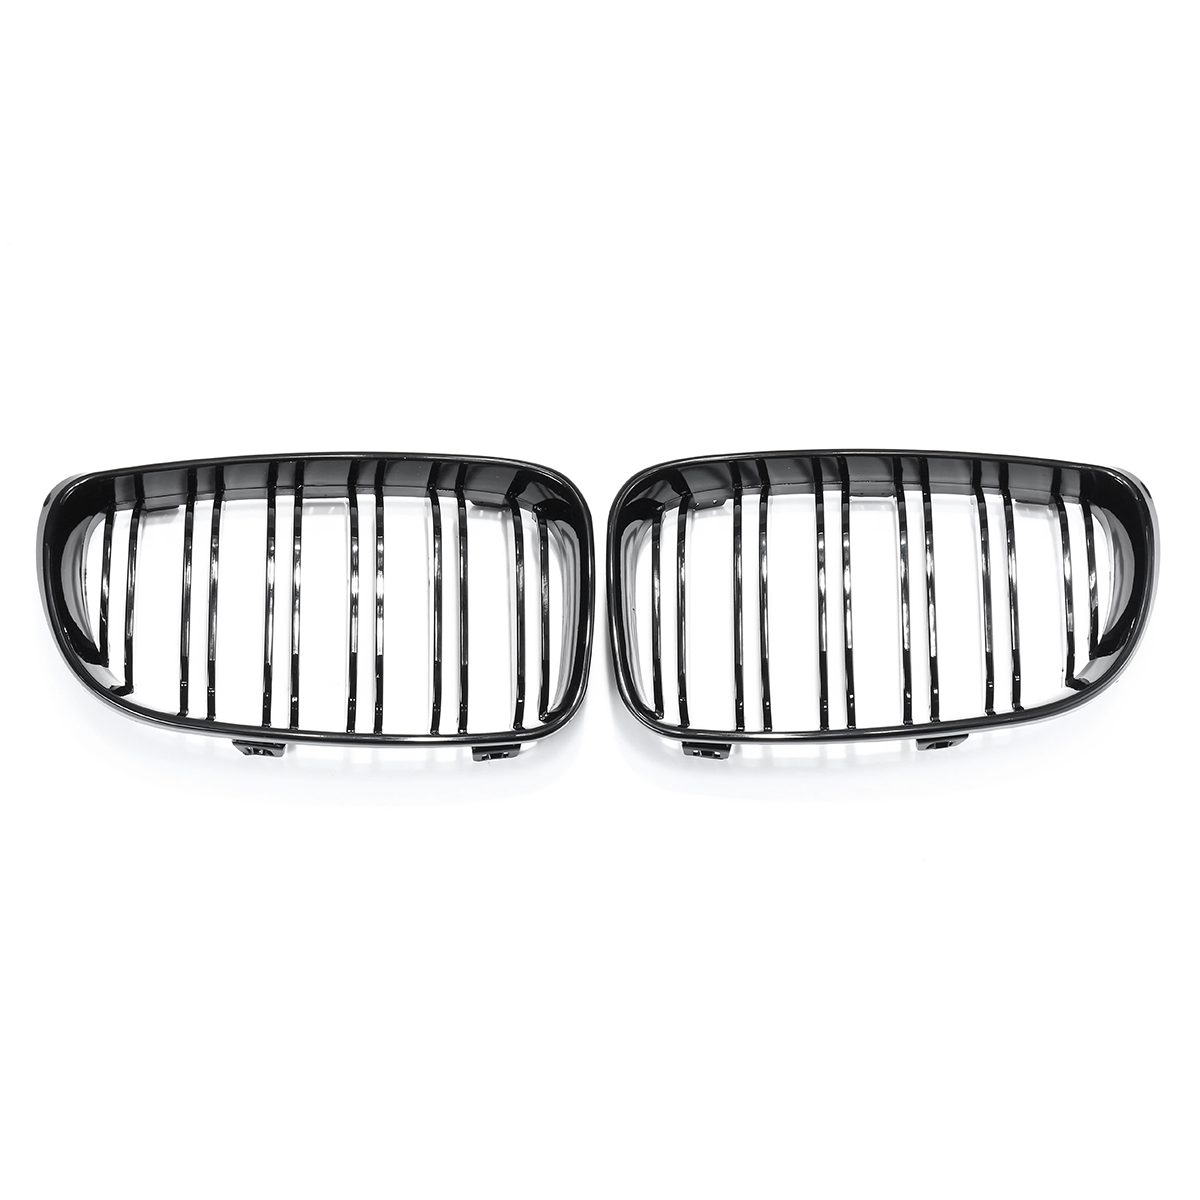 A Pair of ABS Gloss Black Front Kidney Grille for BMW E87 1 Series 08-13 - Auto GoShop